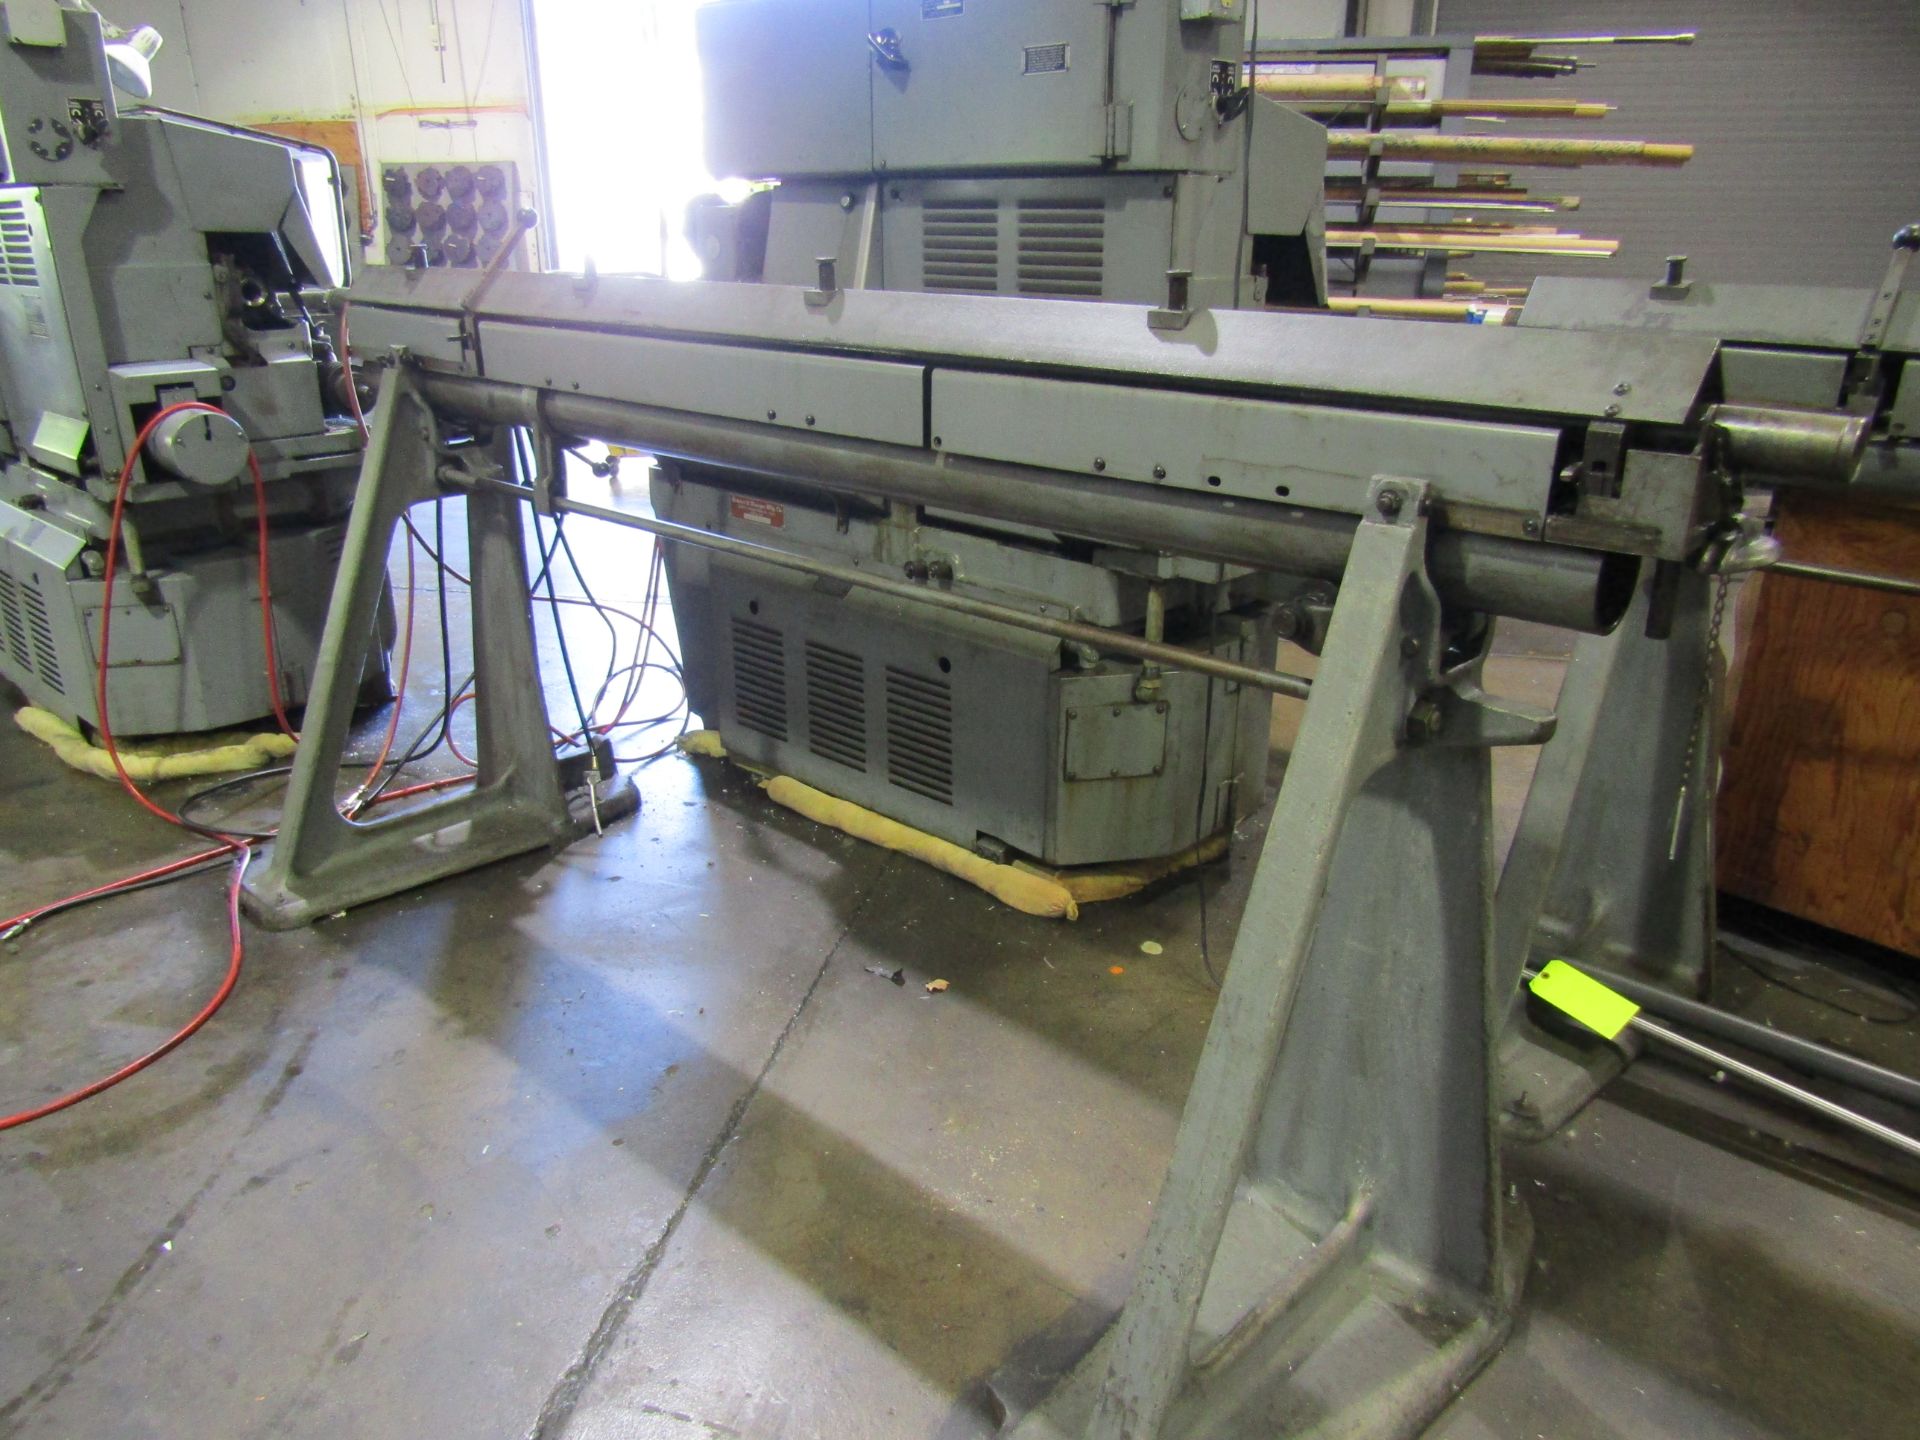 BROWNE & SHARPE AUTOMATIC LATHE SCREW MACHINE, SERIAL 542-2-6927-1 5/8. LOT TO INCLUDE: ASSOCIATED - Image 7 of 7